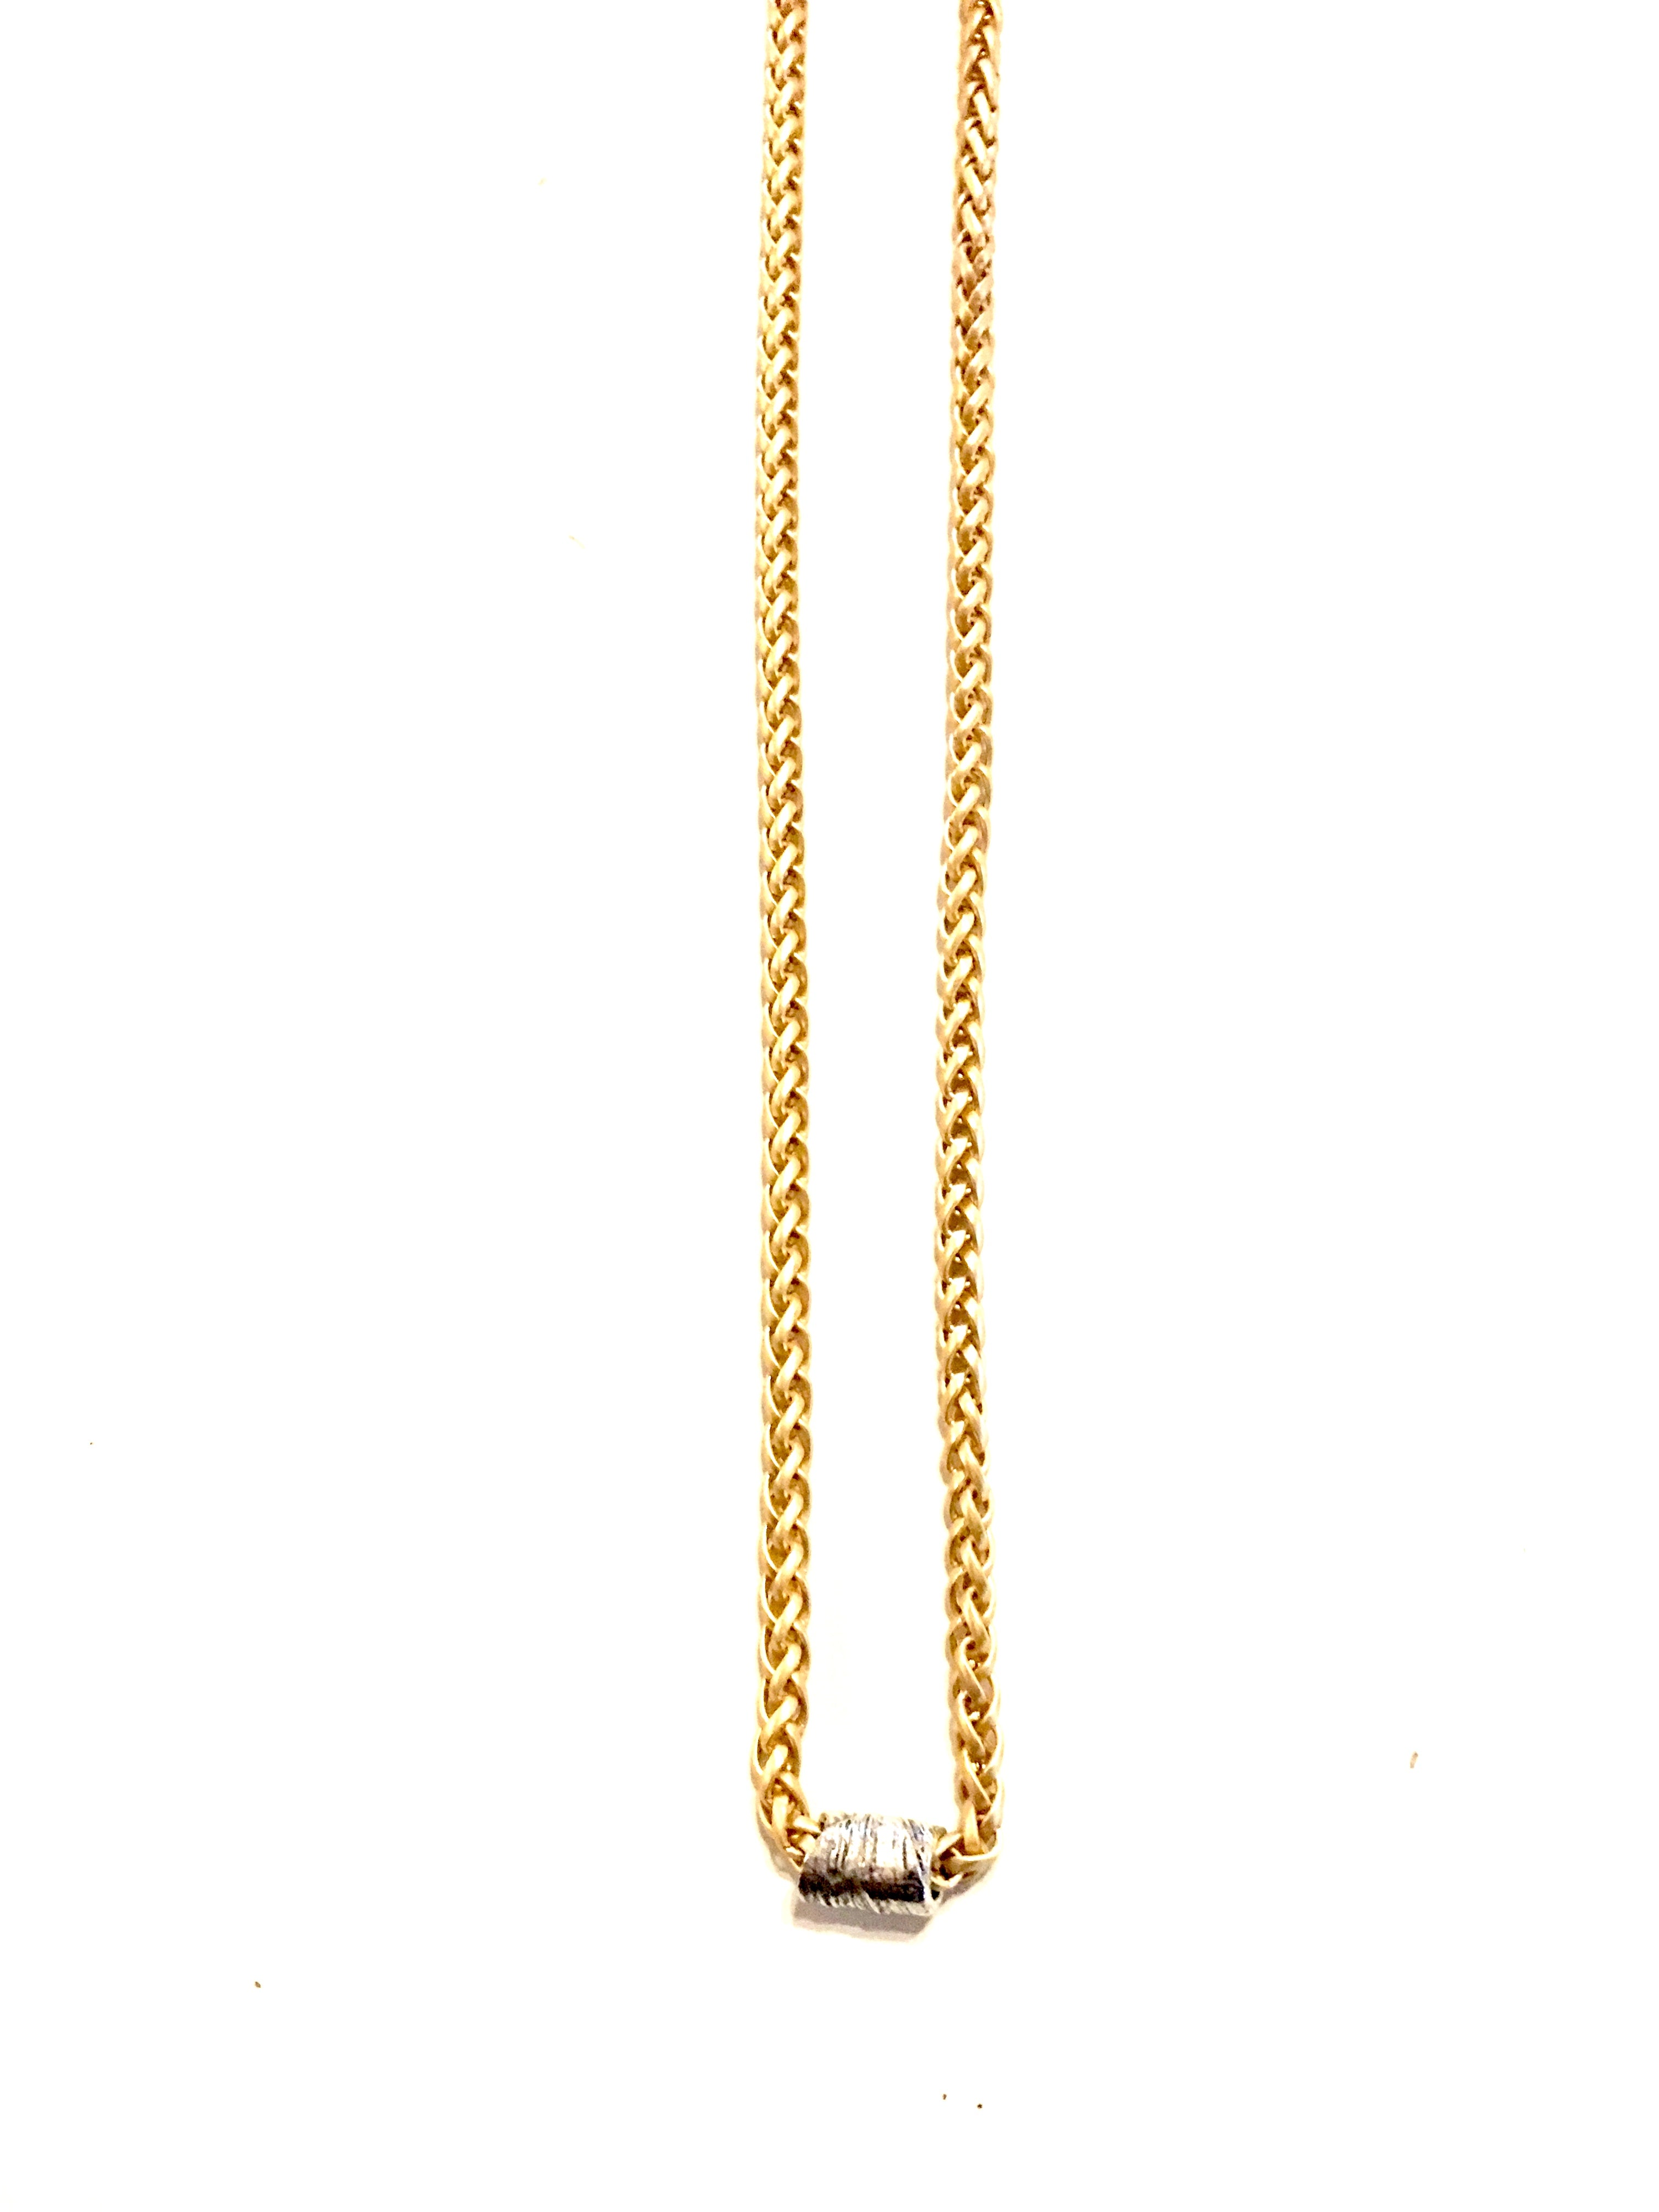 Eaves Necklace